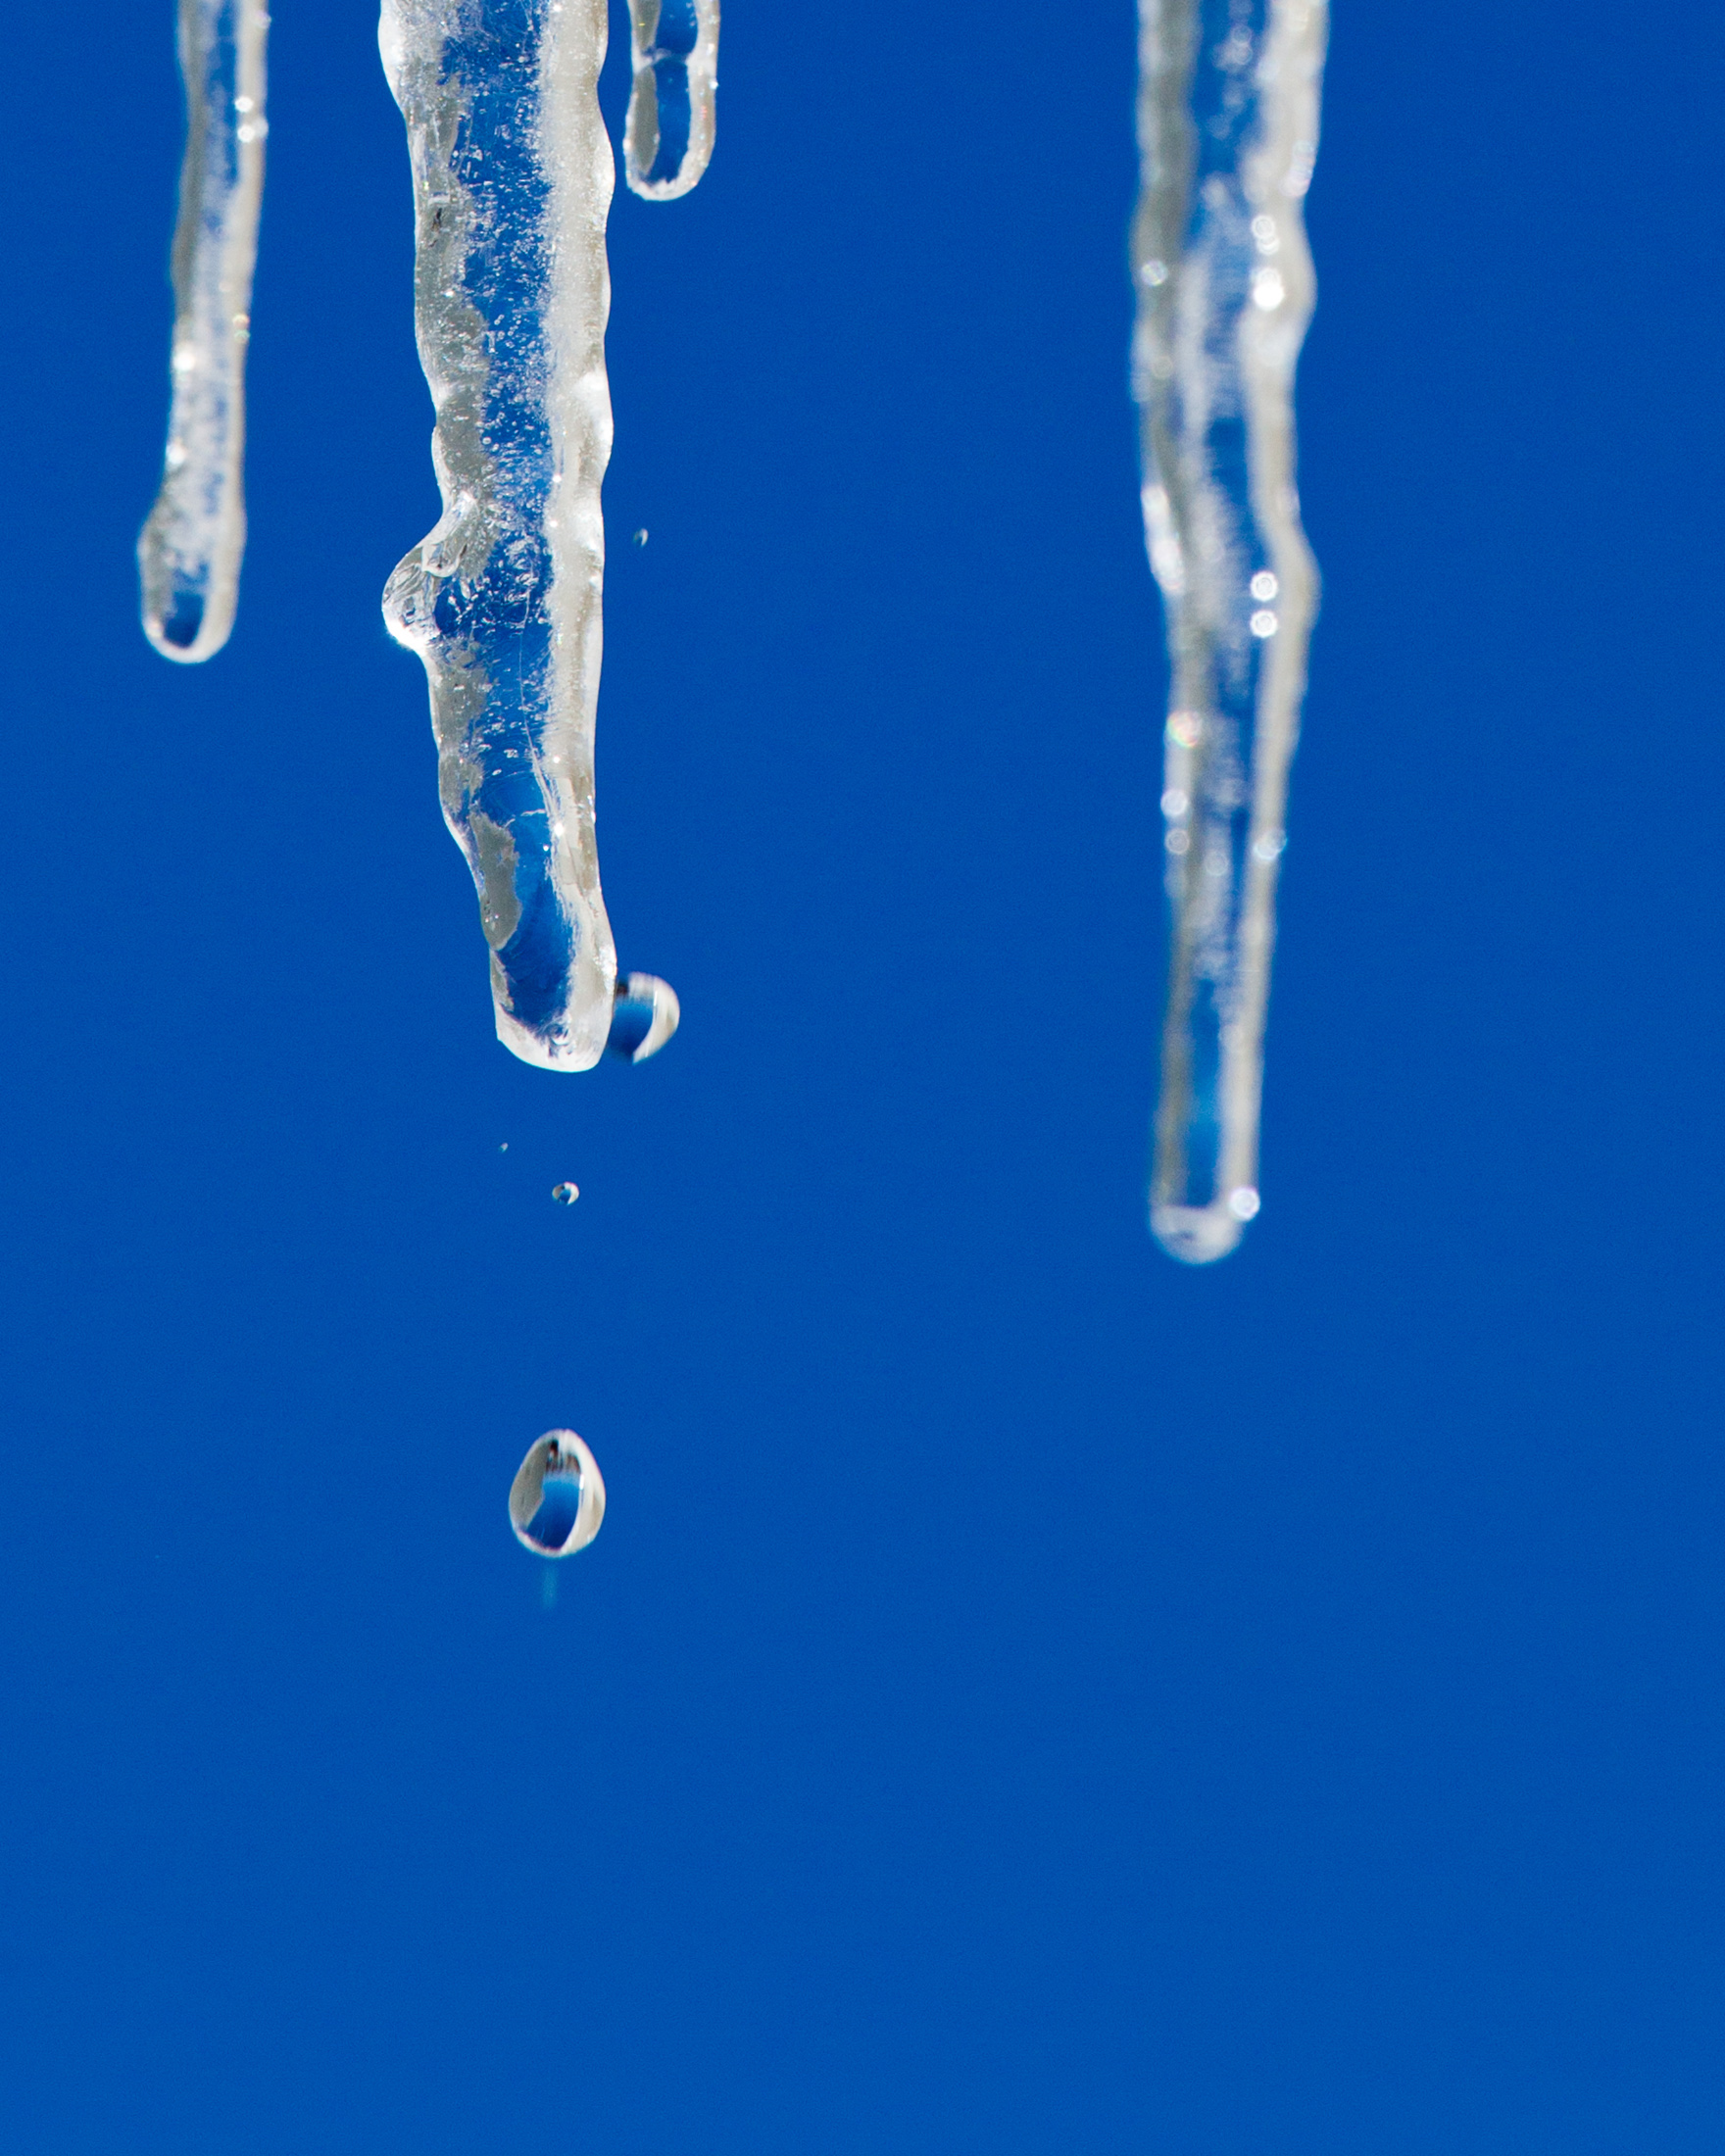 Water and Ice, Abstract, Ice, Wet, Water, HQ Photo